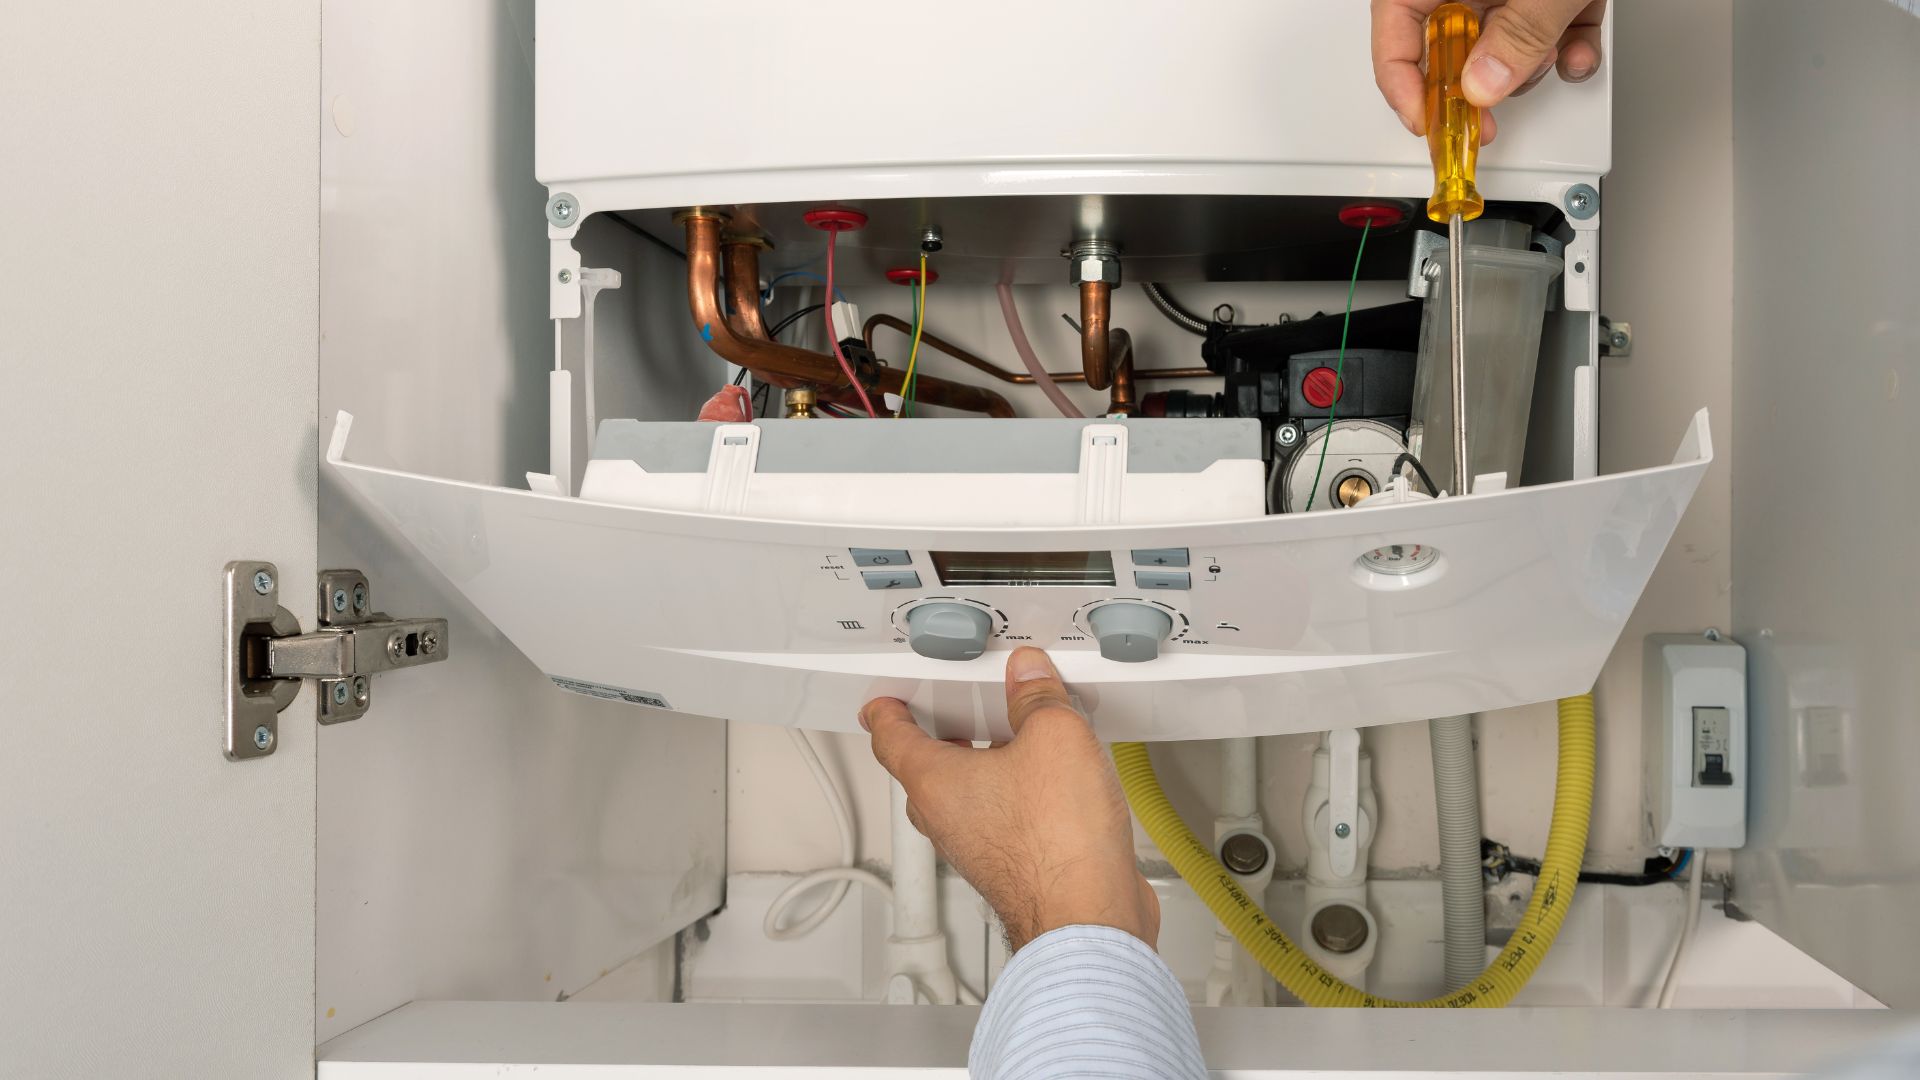 For the installation of new boilers, rely on our expertise tailored for plumbers.